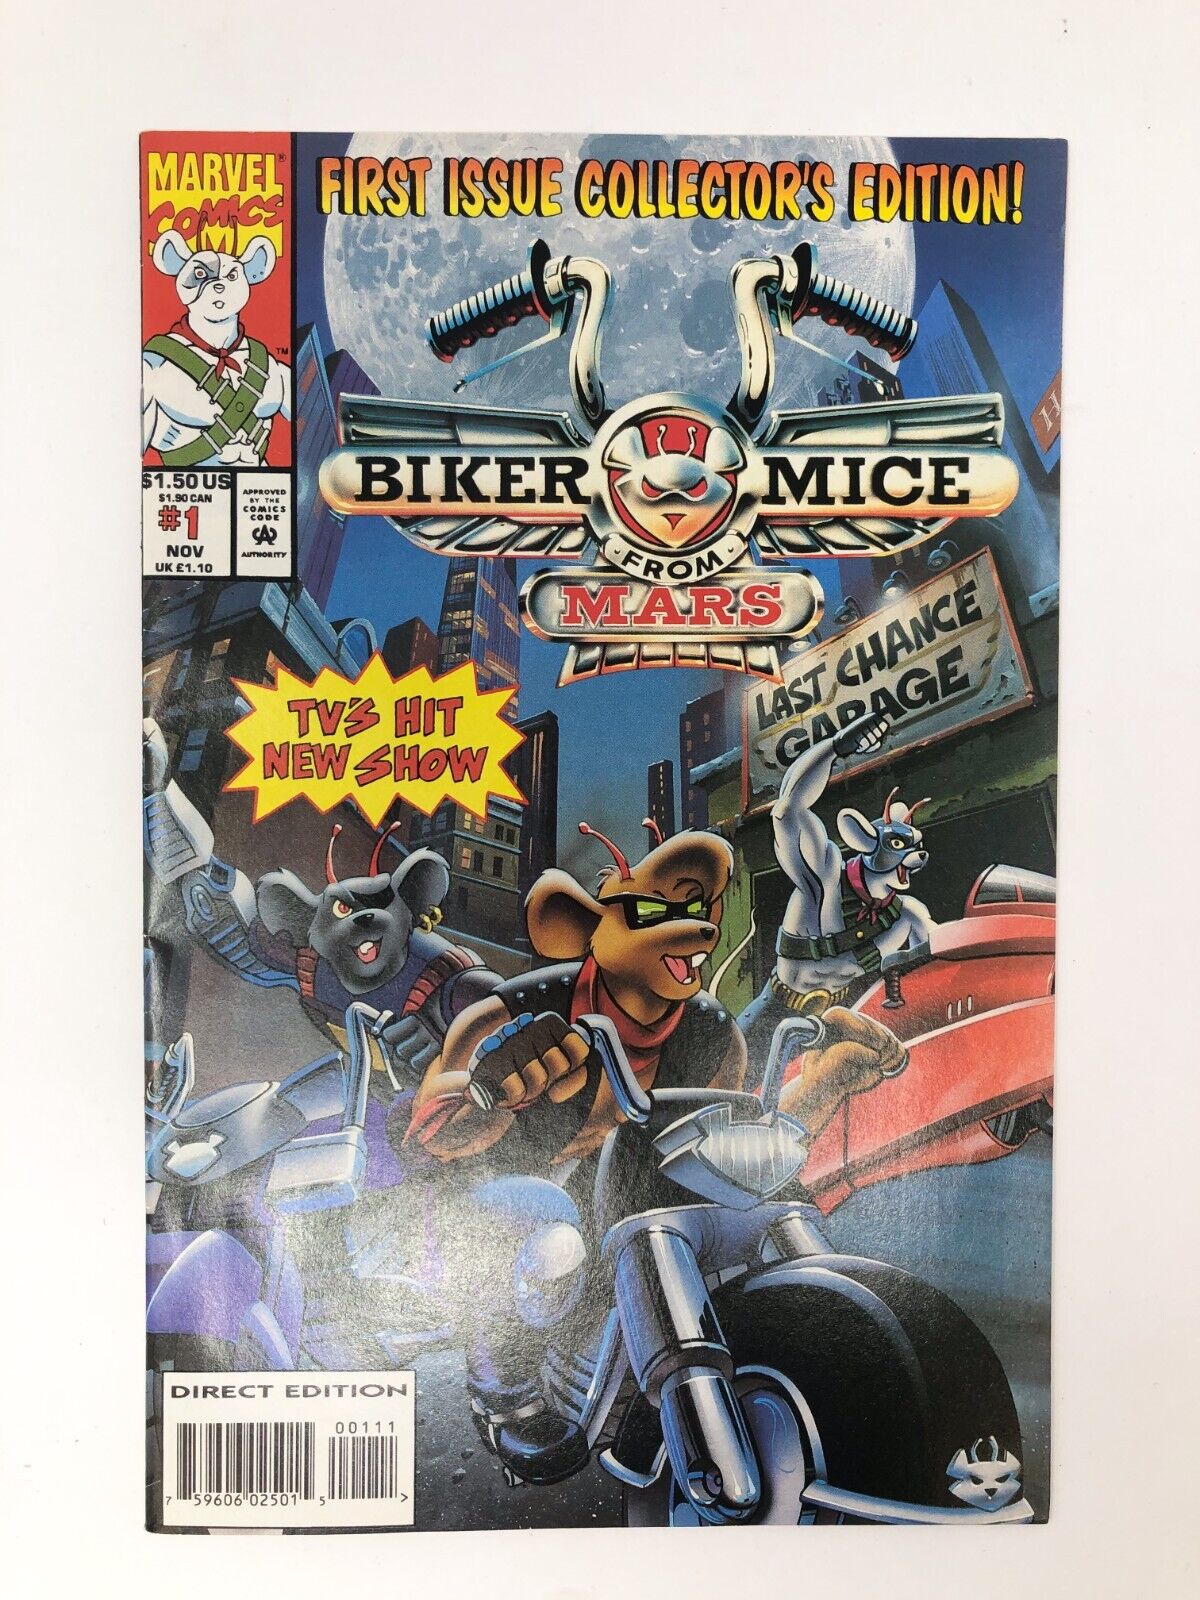 Biker Mice From Mars #1 - 1993 Marvel Comics - Direct Edition - First Appearance